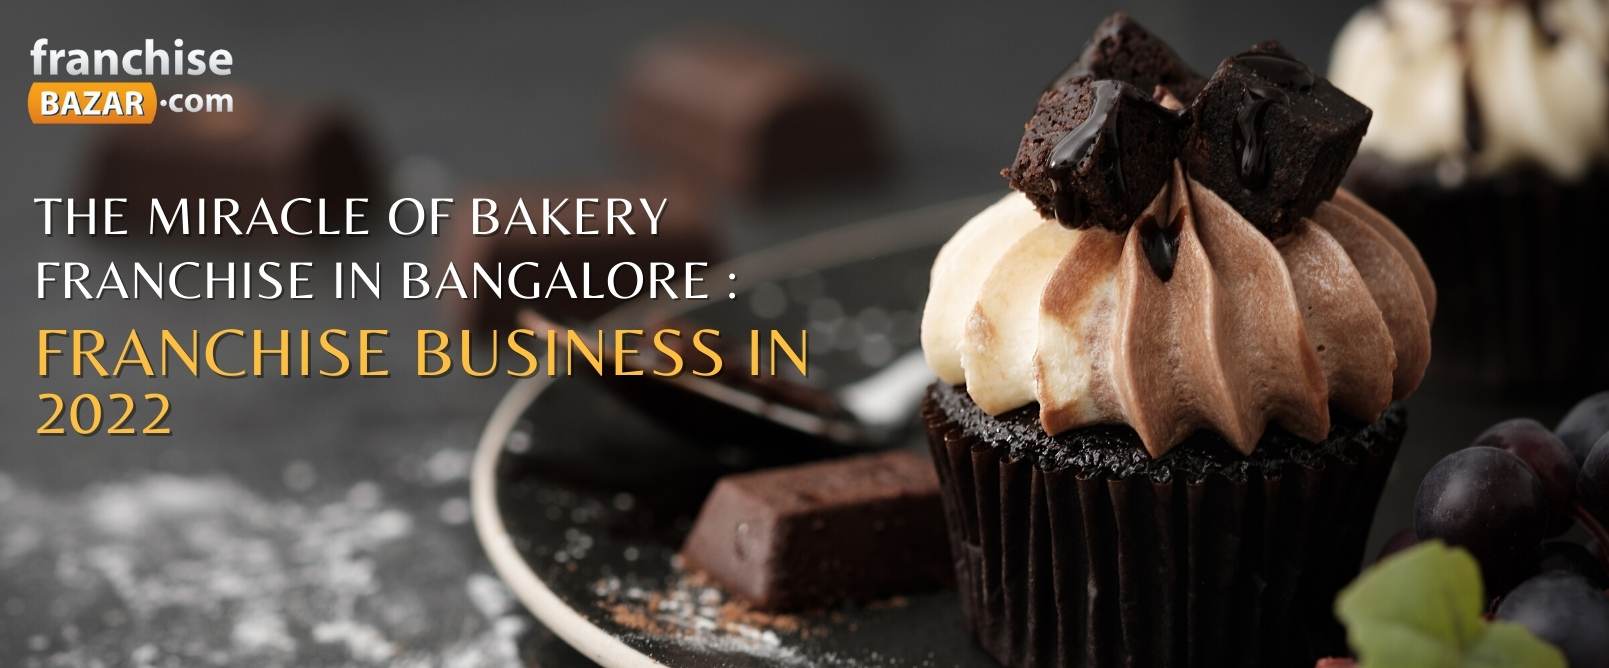 The Miracle Of Bakery Franchise In Bangalore : Franchise Business In 2022	